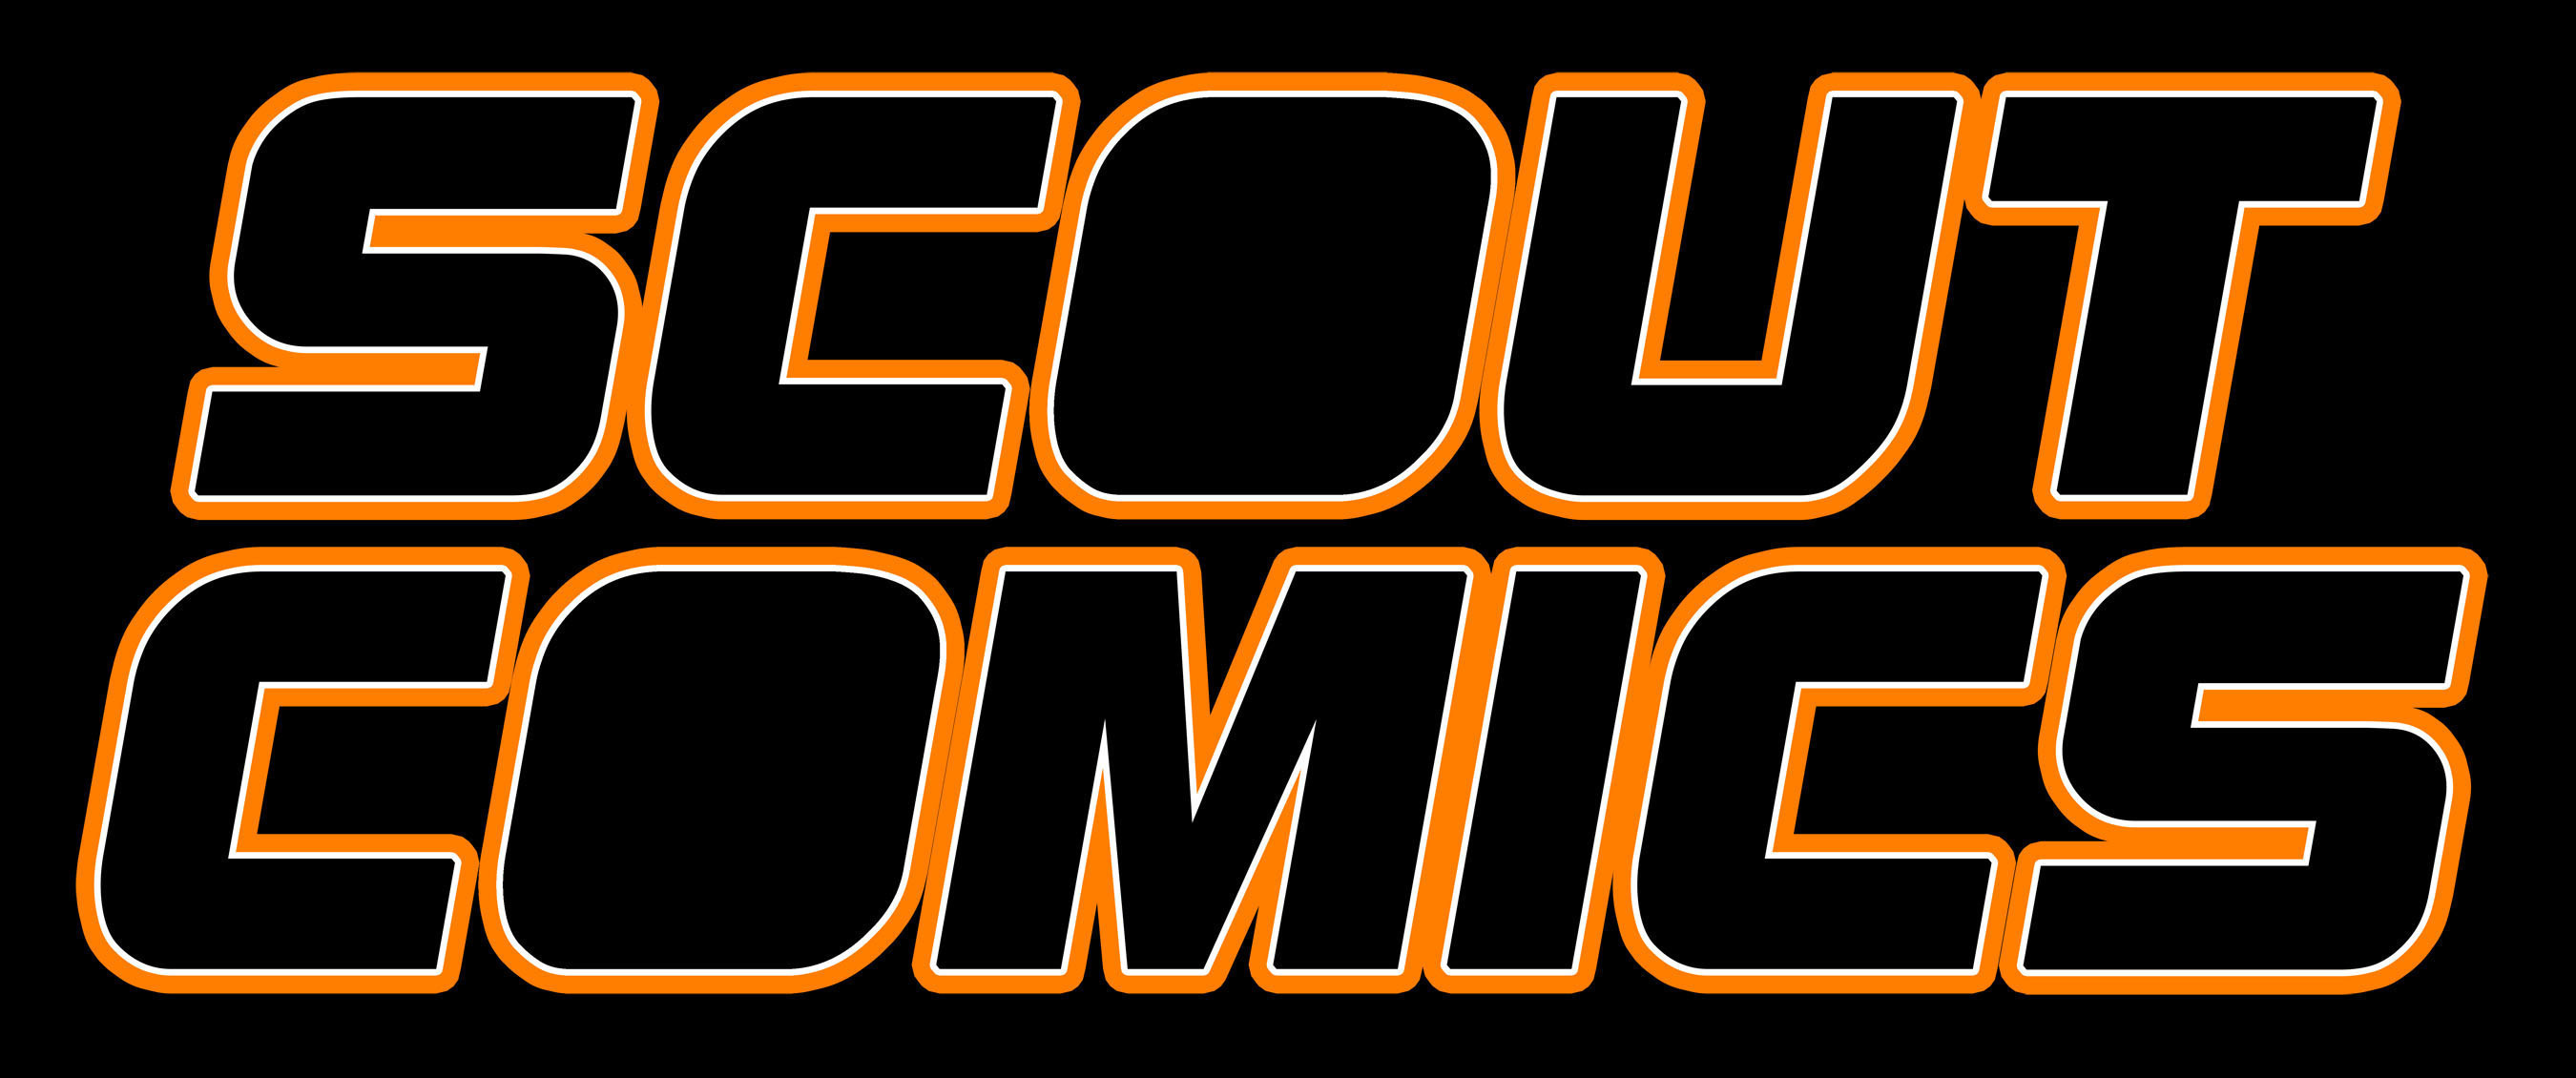 OK, INC. AND SCOUT COMICS TO LAUNCH SOLARMAN IN SUMMER 2015